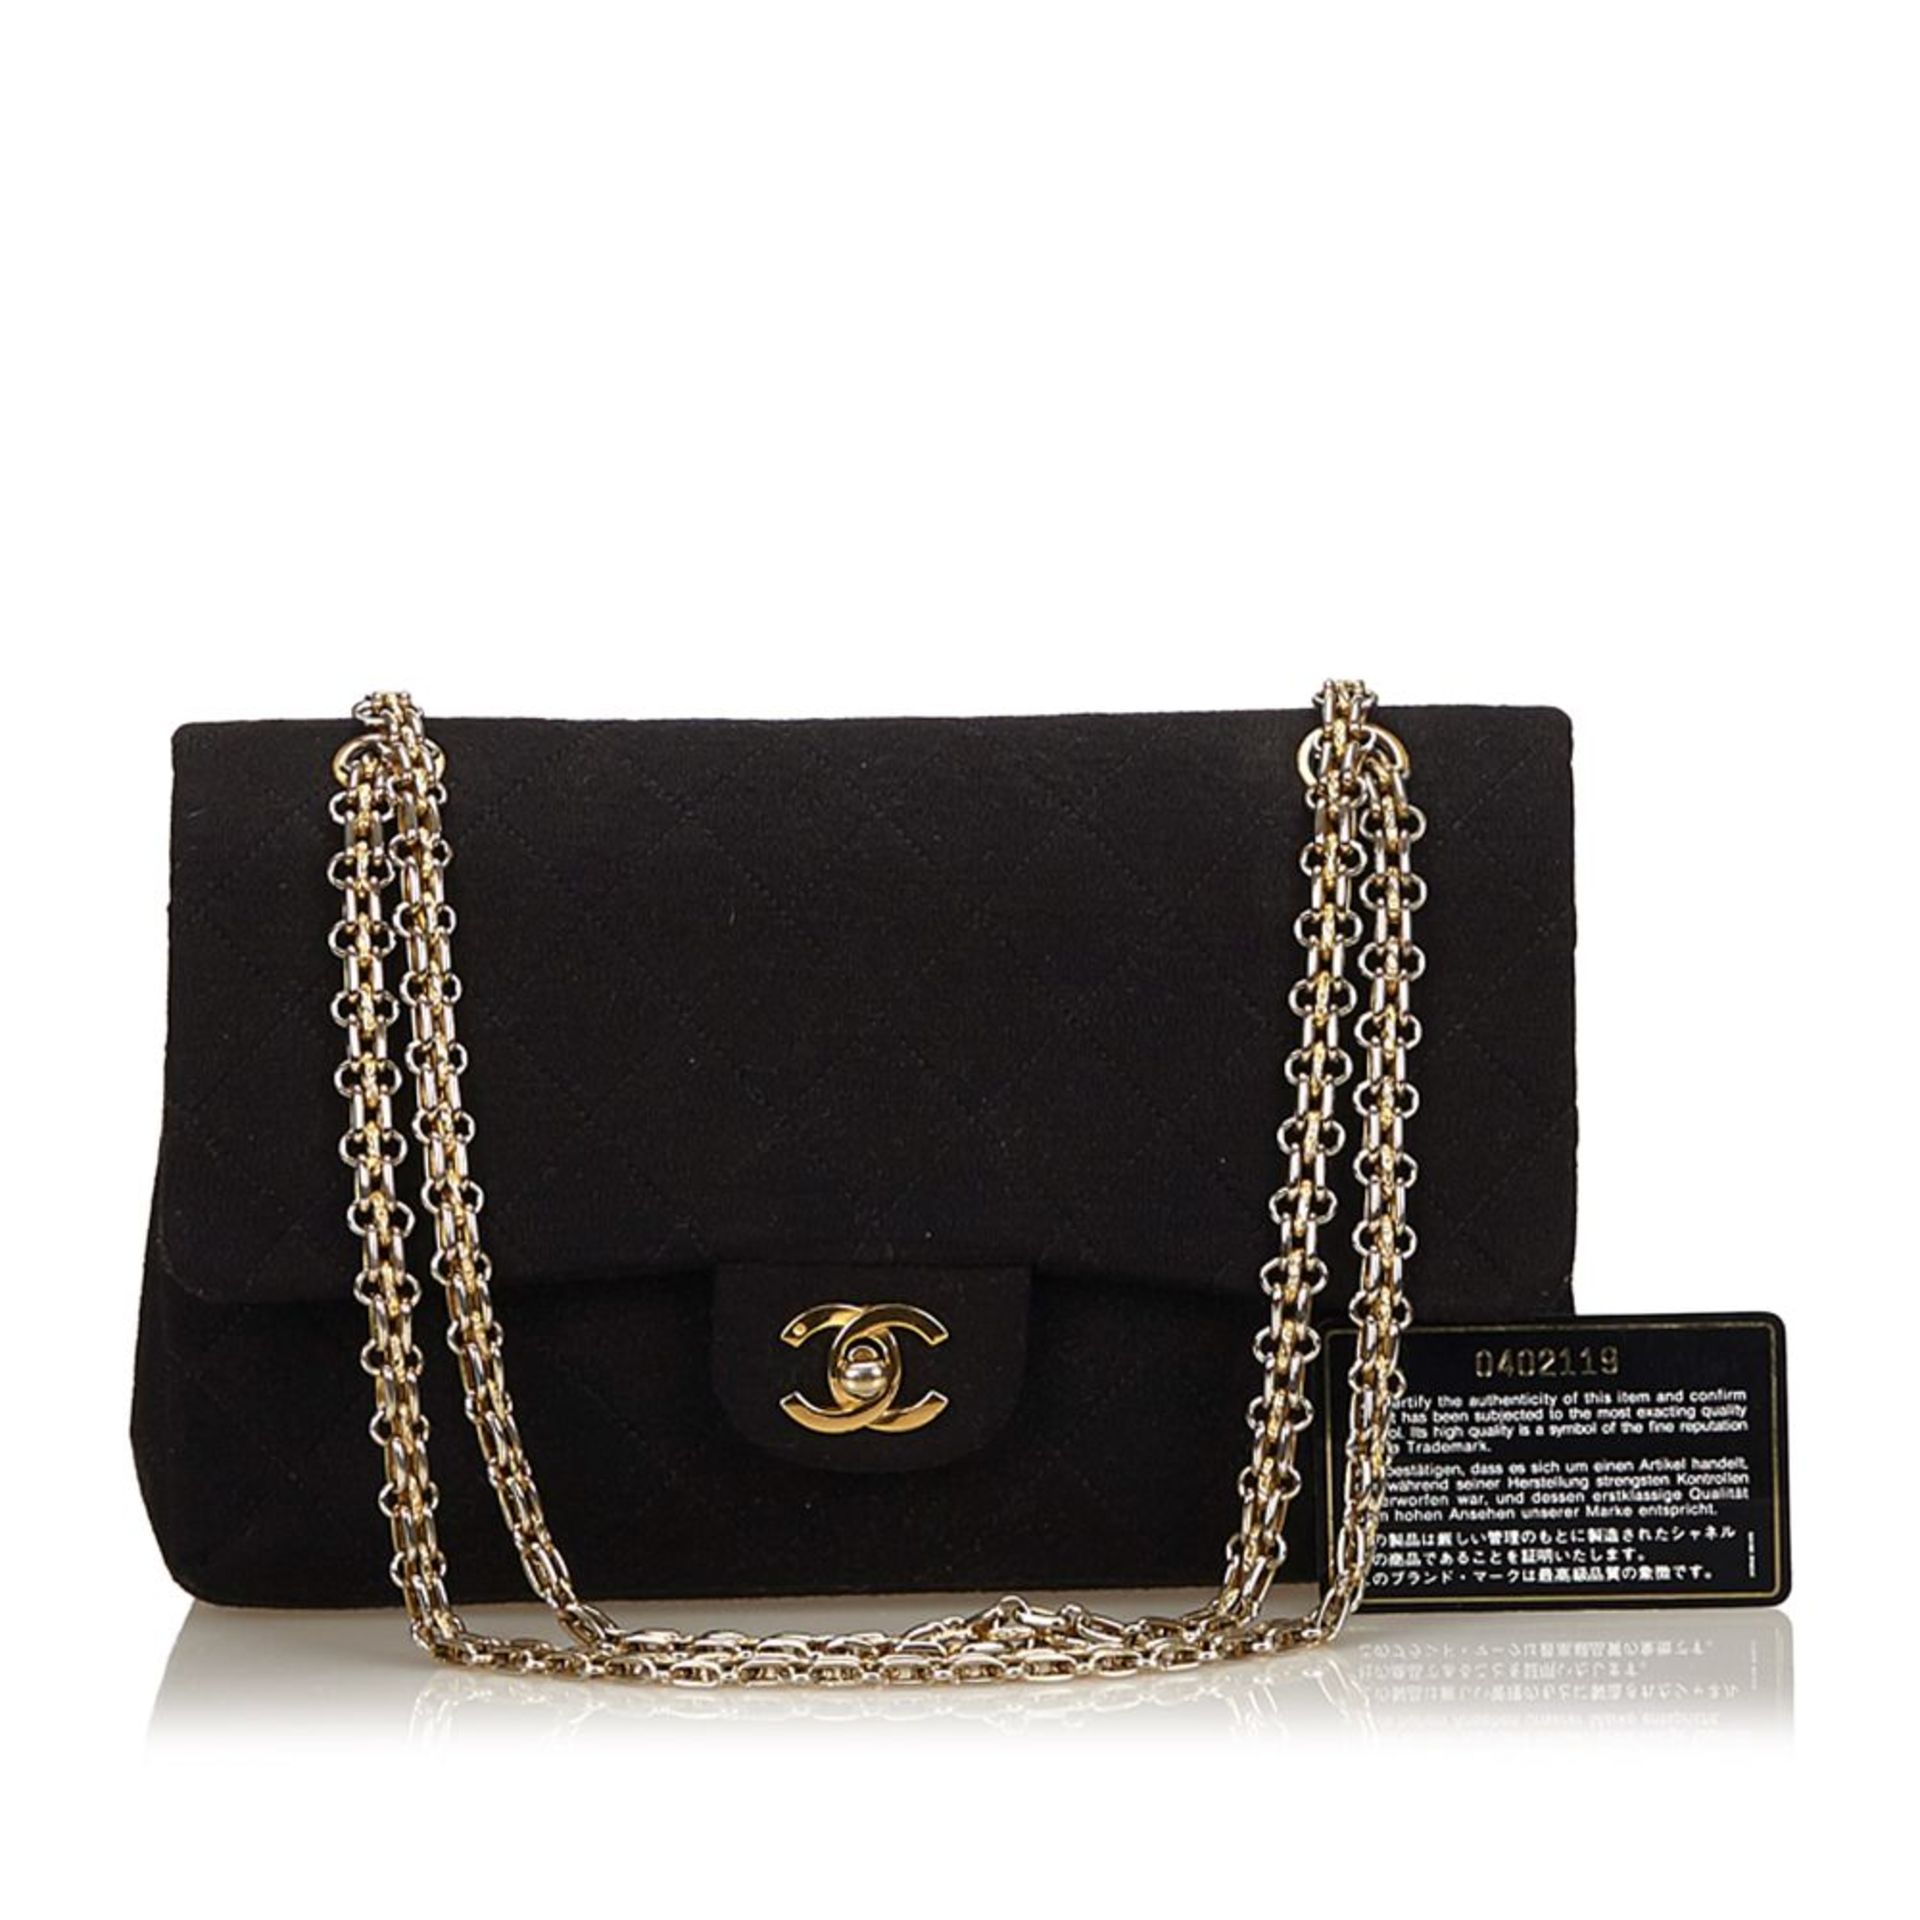 A Chanel classic medium cotton double flap shoulder bag,featuring a quilted cotton body with chain - Image 5 of 5